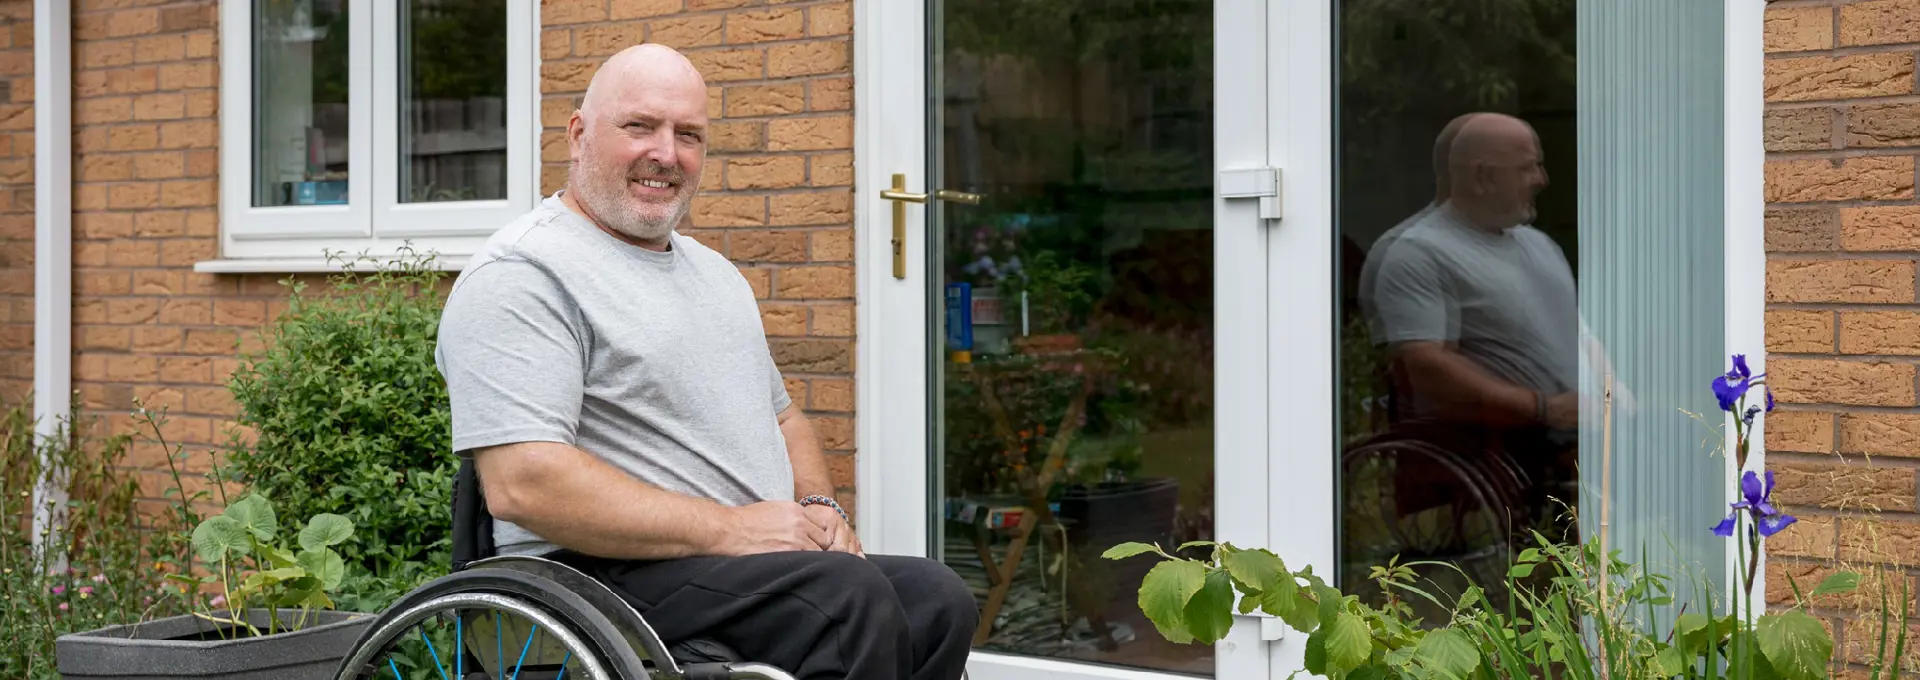 Man in wheelchair outside his home